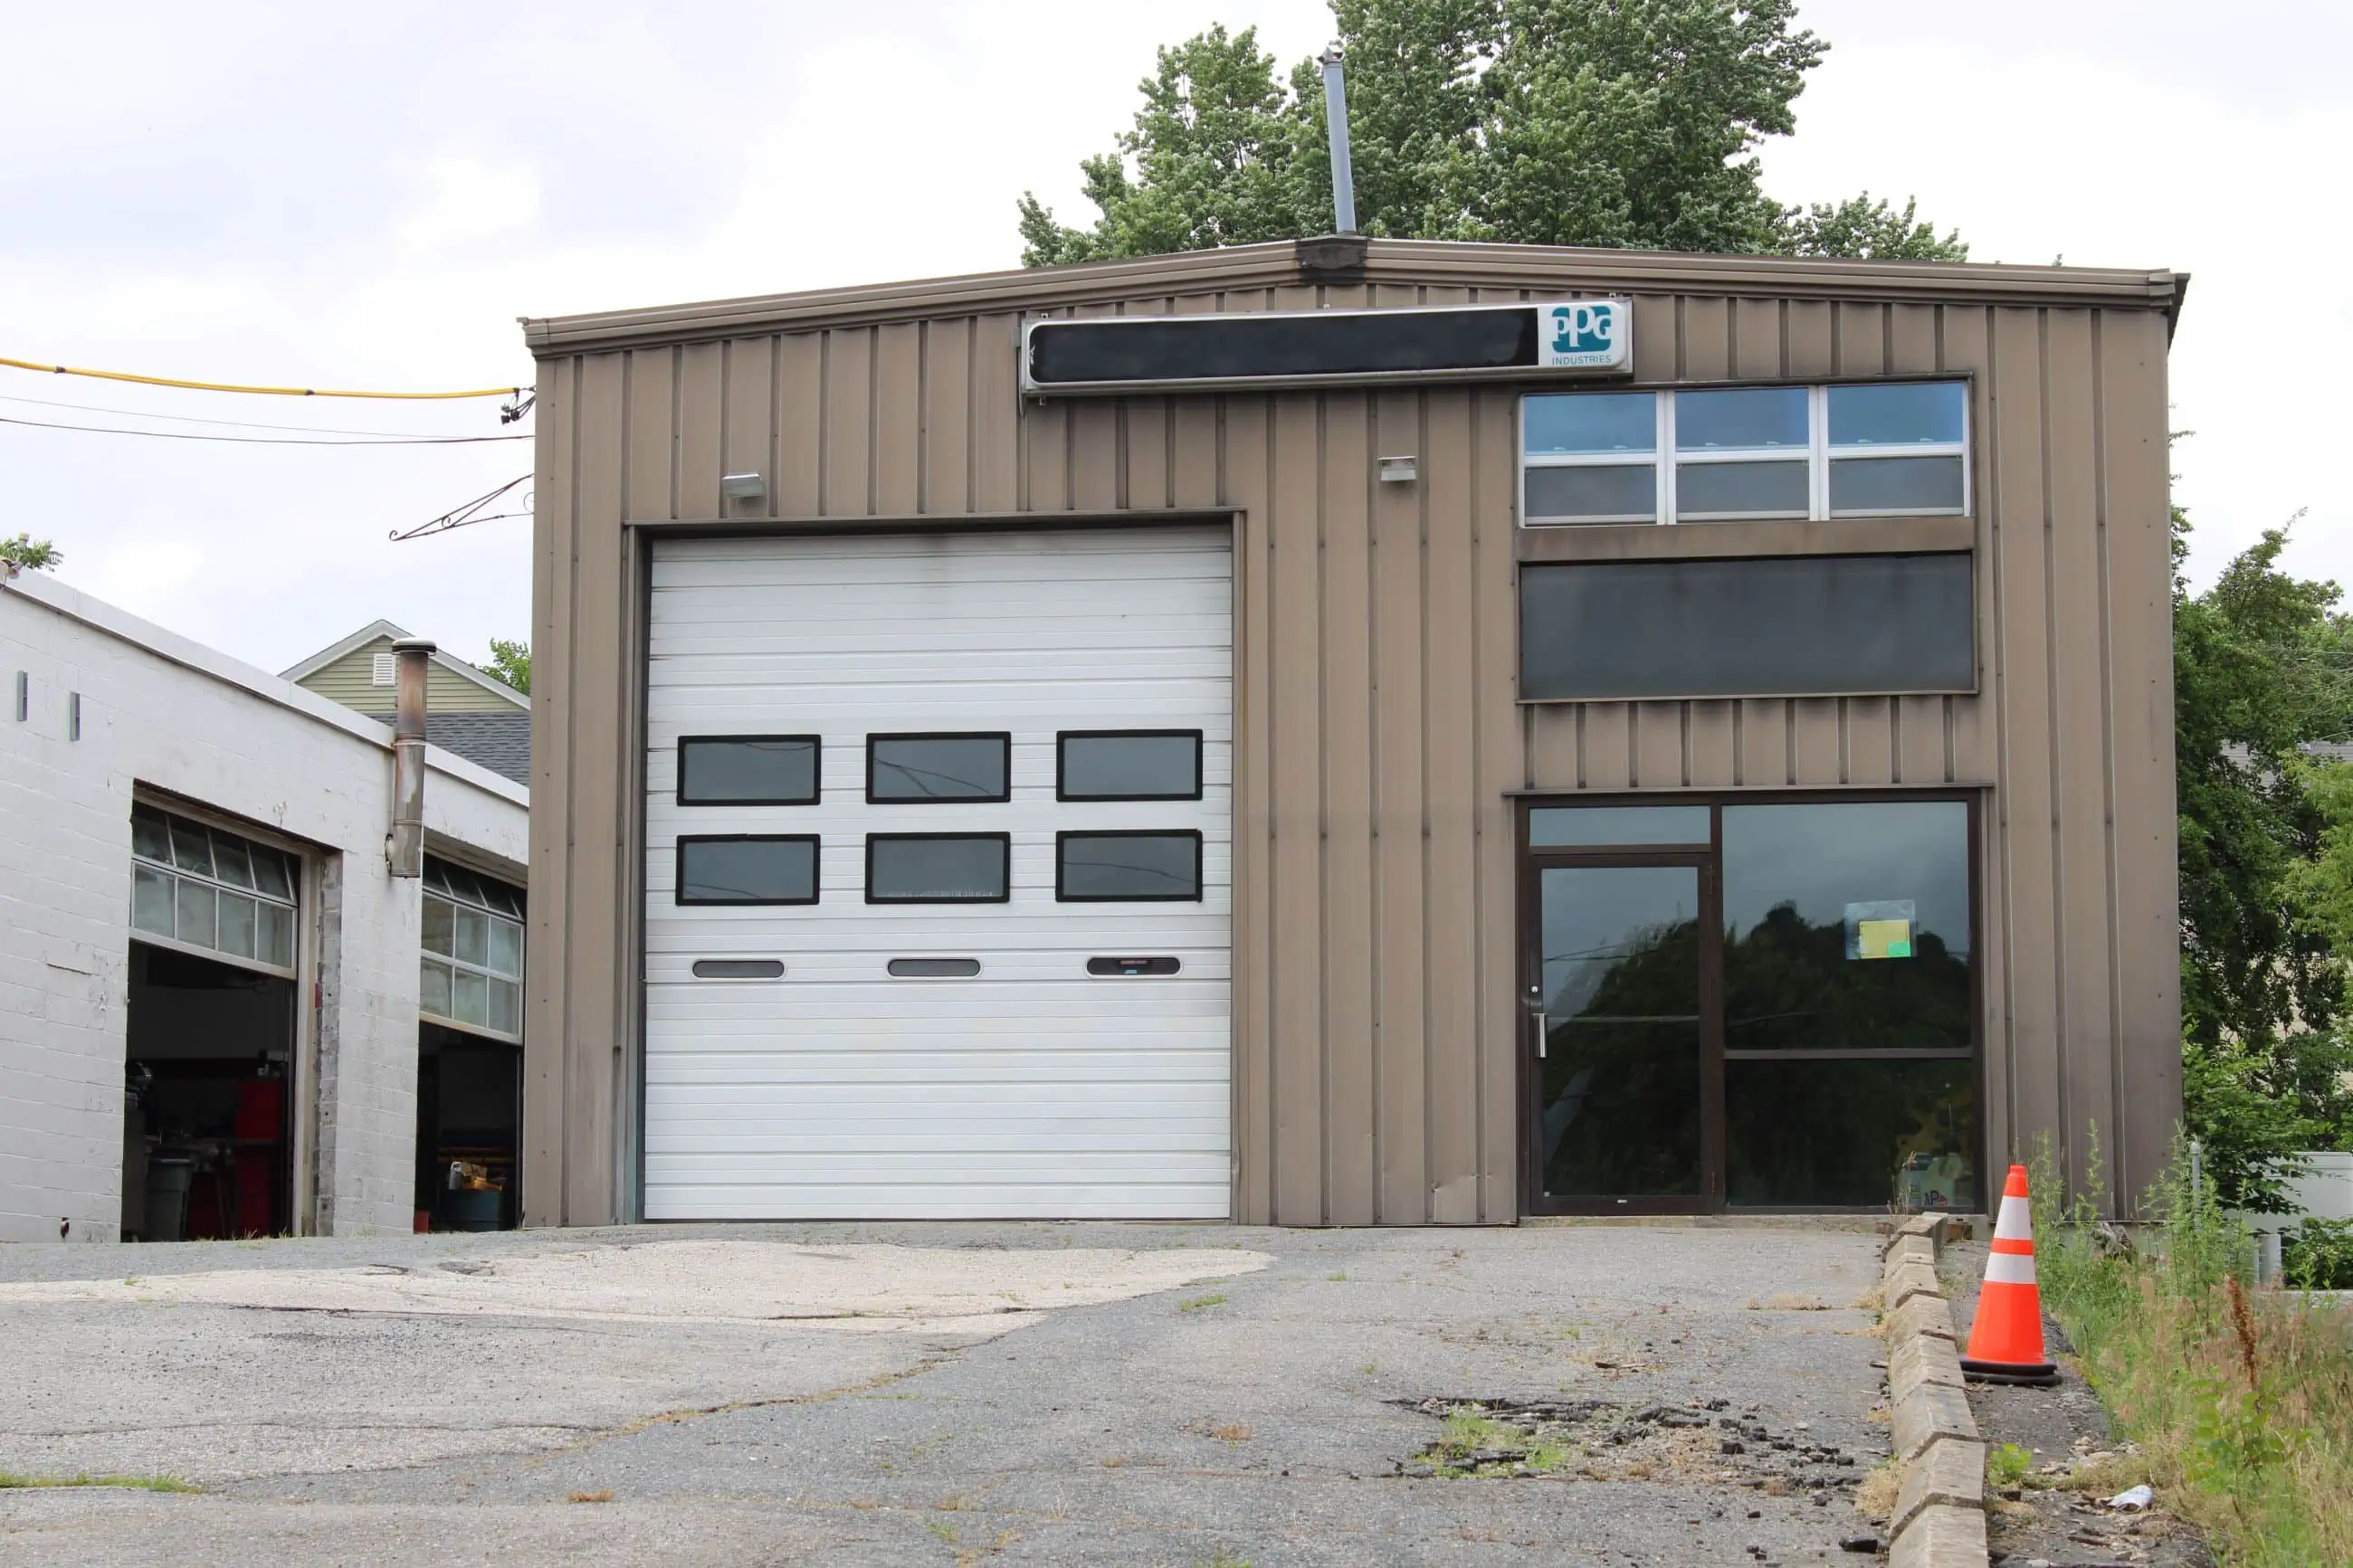 Professional Automotive garage in Marlborough wishes to expand